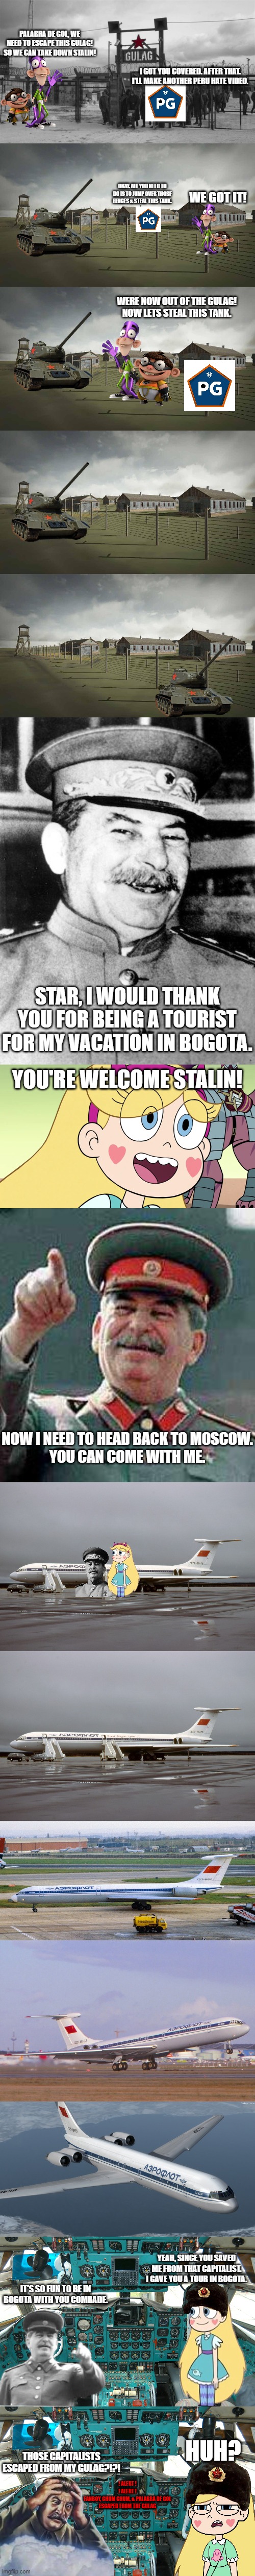 Before Stalin Sent Fanboy and Chum Chum to the Gulag again | PALABRA DE GOL, WE NEED TO ESCAPE THIS GULAG! SO WE CAN TAKE DOWN STALIN! I GOT YOU COVERED. AFTER THAT. I'LL MAKE ANOTHER PERU HATE VIDEO. WE GOT IT! OKAY. ALL YOU NEED TO DO IS TO JUMP OVER THOSE FENCES & STEAL THIS TANK. WERE NOW OUT OF THE GULAG! NOW LETS STEAL THIS TANK. STAR, I WOULD THANK YOU FOR BEING A TOURIST FOR MY VACATION IN BOGOTA. YOU'RE WELCOME STALIN! NOW I NEED TO HEAD BACK TO MOSCOW.
YOU CAN COME WITH ME. YEAH, SINCE YOU SAVED ME FROM THAT CAPITALIST. I GAVE YOU A TOUR IN BOGOTA. IT'S SO FUN TO BE IN BOGOTA WITH YOU COMRADE. HUH? THOSE CAPITALISTS ESCAPED FROM MY GULAG?!?! ! ALERT !
! ALERT !
FANBOY, CHUM CHUM, & PALABRA DE GOL ESCAPED FROM THE GULAG | image tagged in gulag,stalin smile,star butterfly,stalin says | made w/ Imgflip meme maker